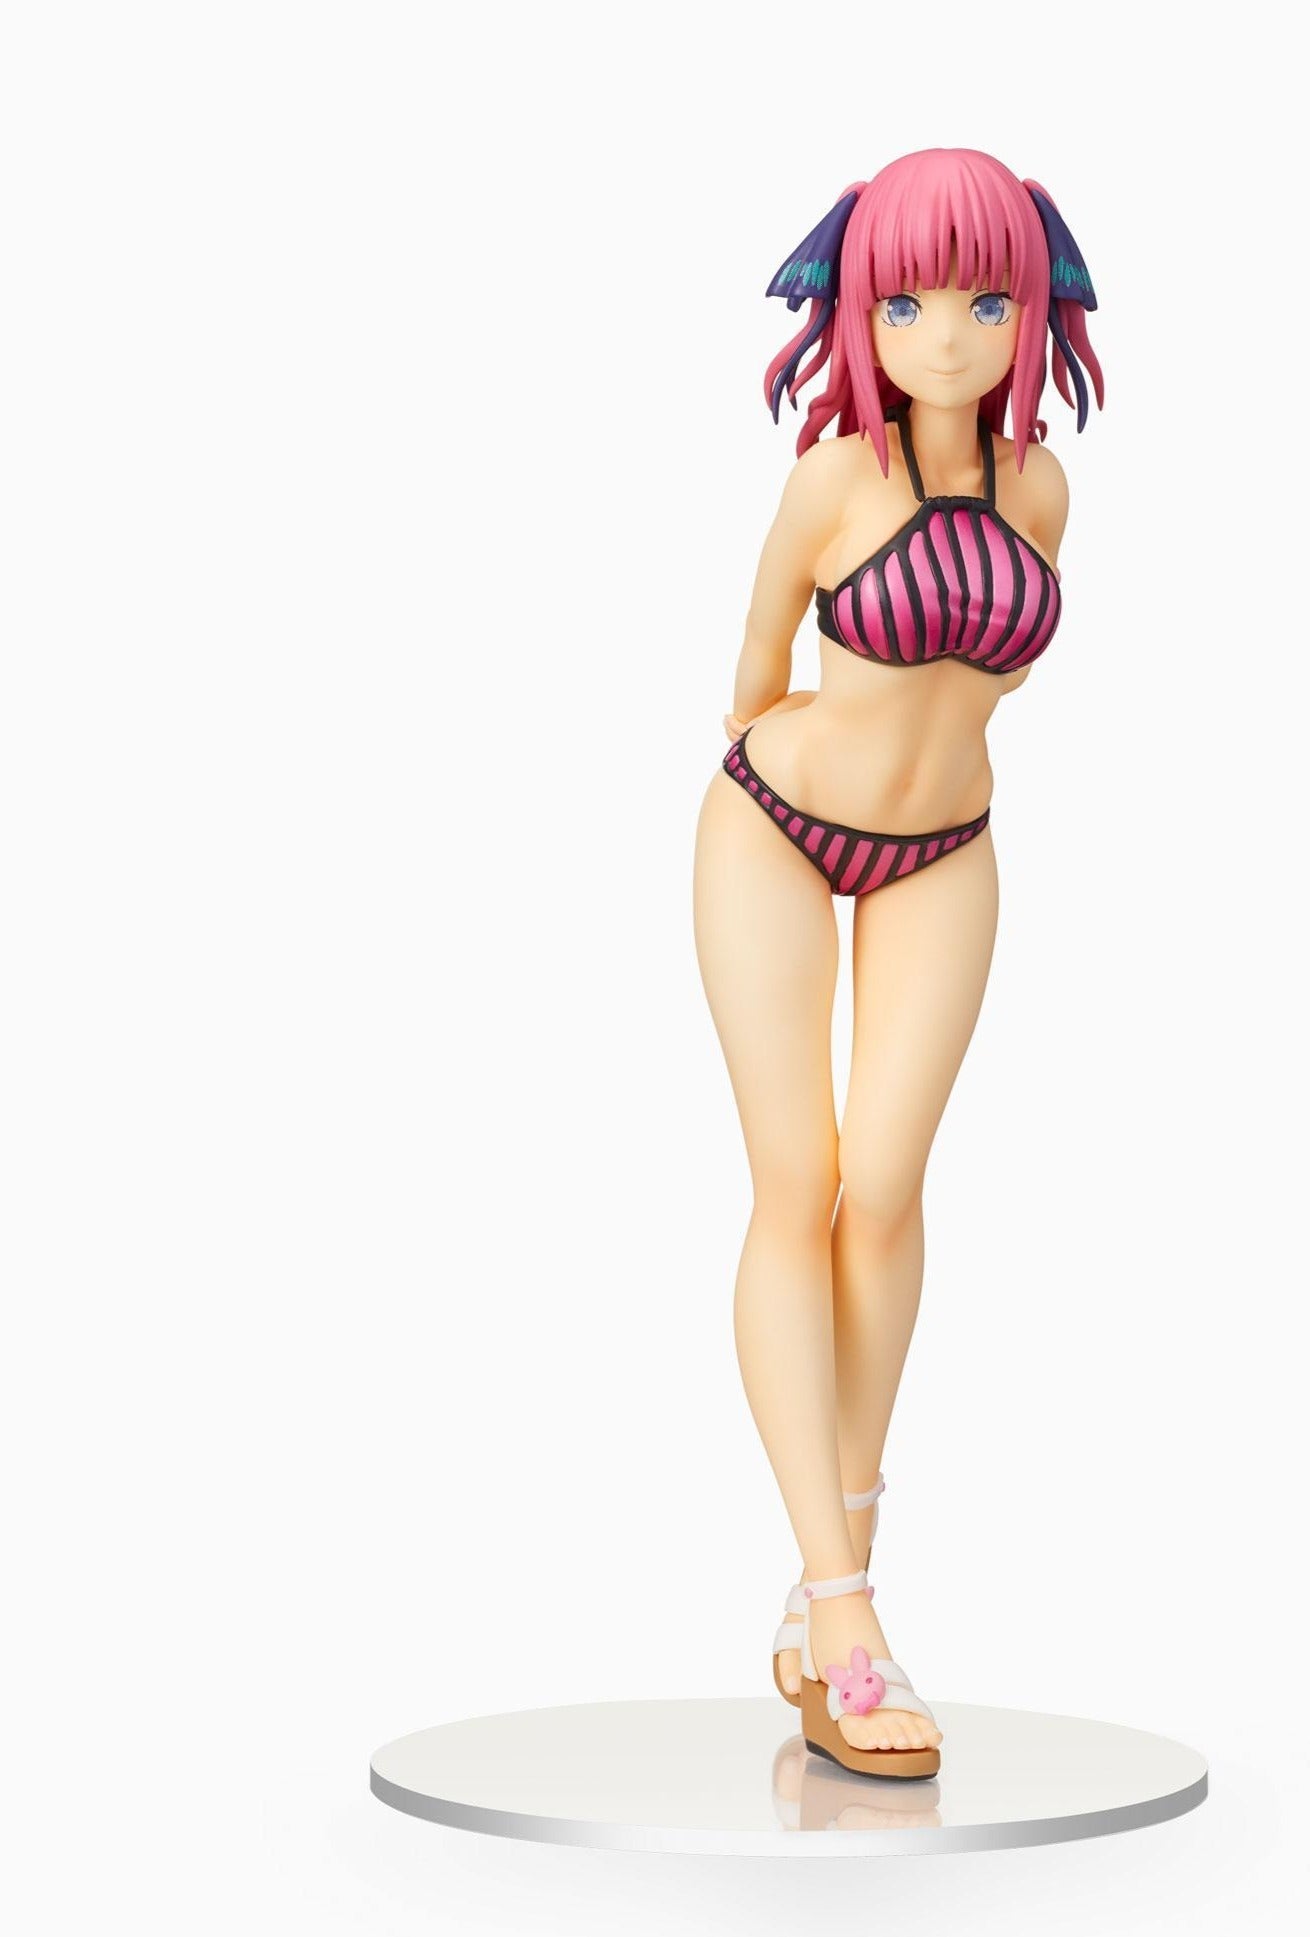 The Quintessential Quintuplets - Nino Nakano 2PM Figure (Swimsuit Ver.) image count 0